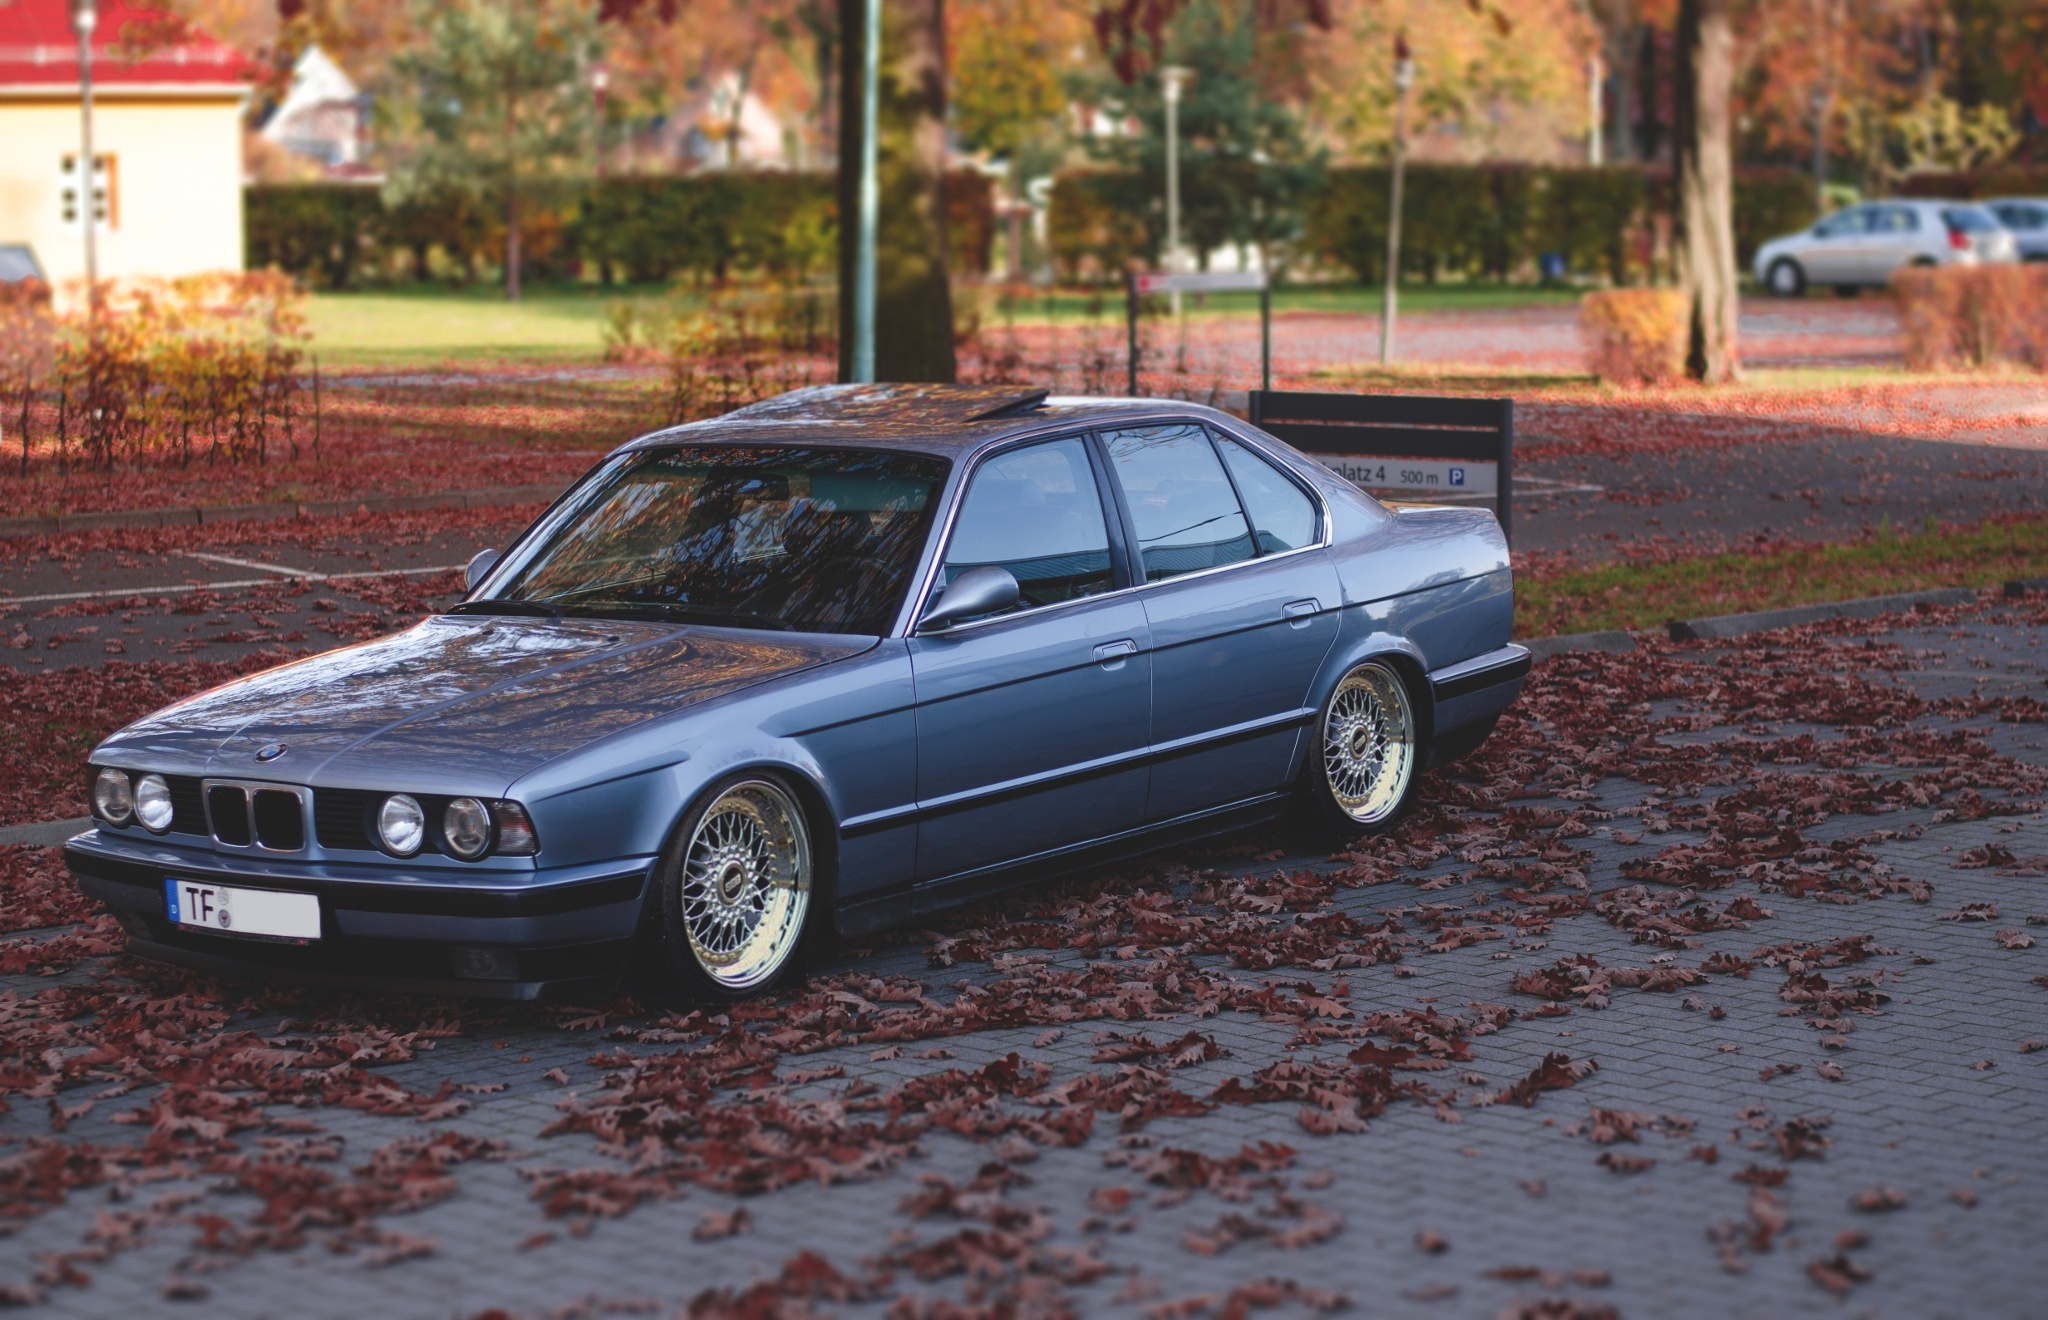 Bmw E34 Wallpapers Images Photos Pictures Backgrounds